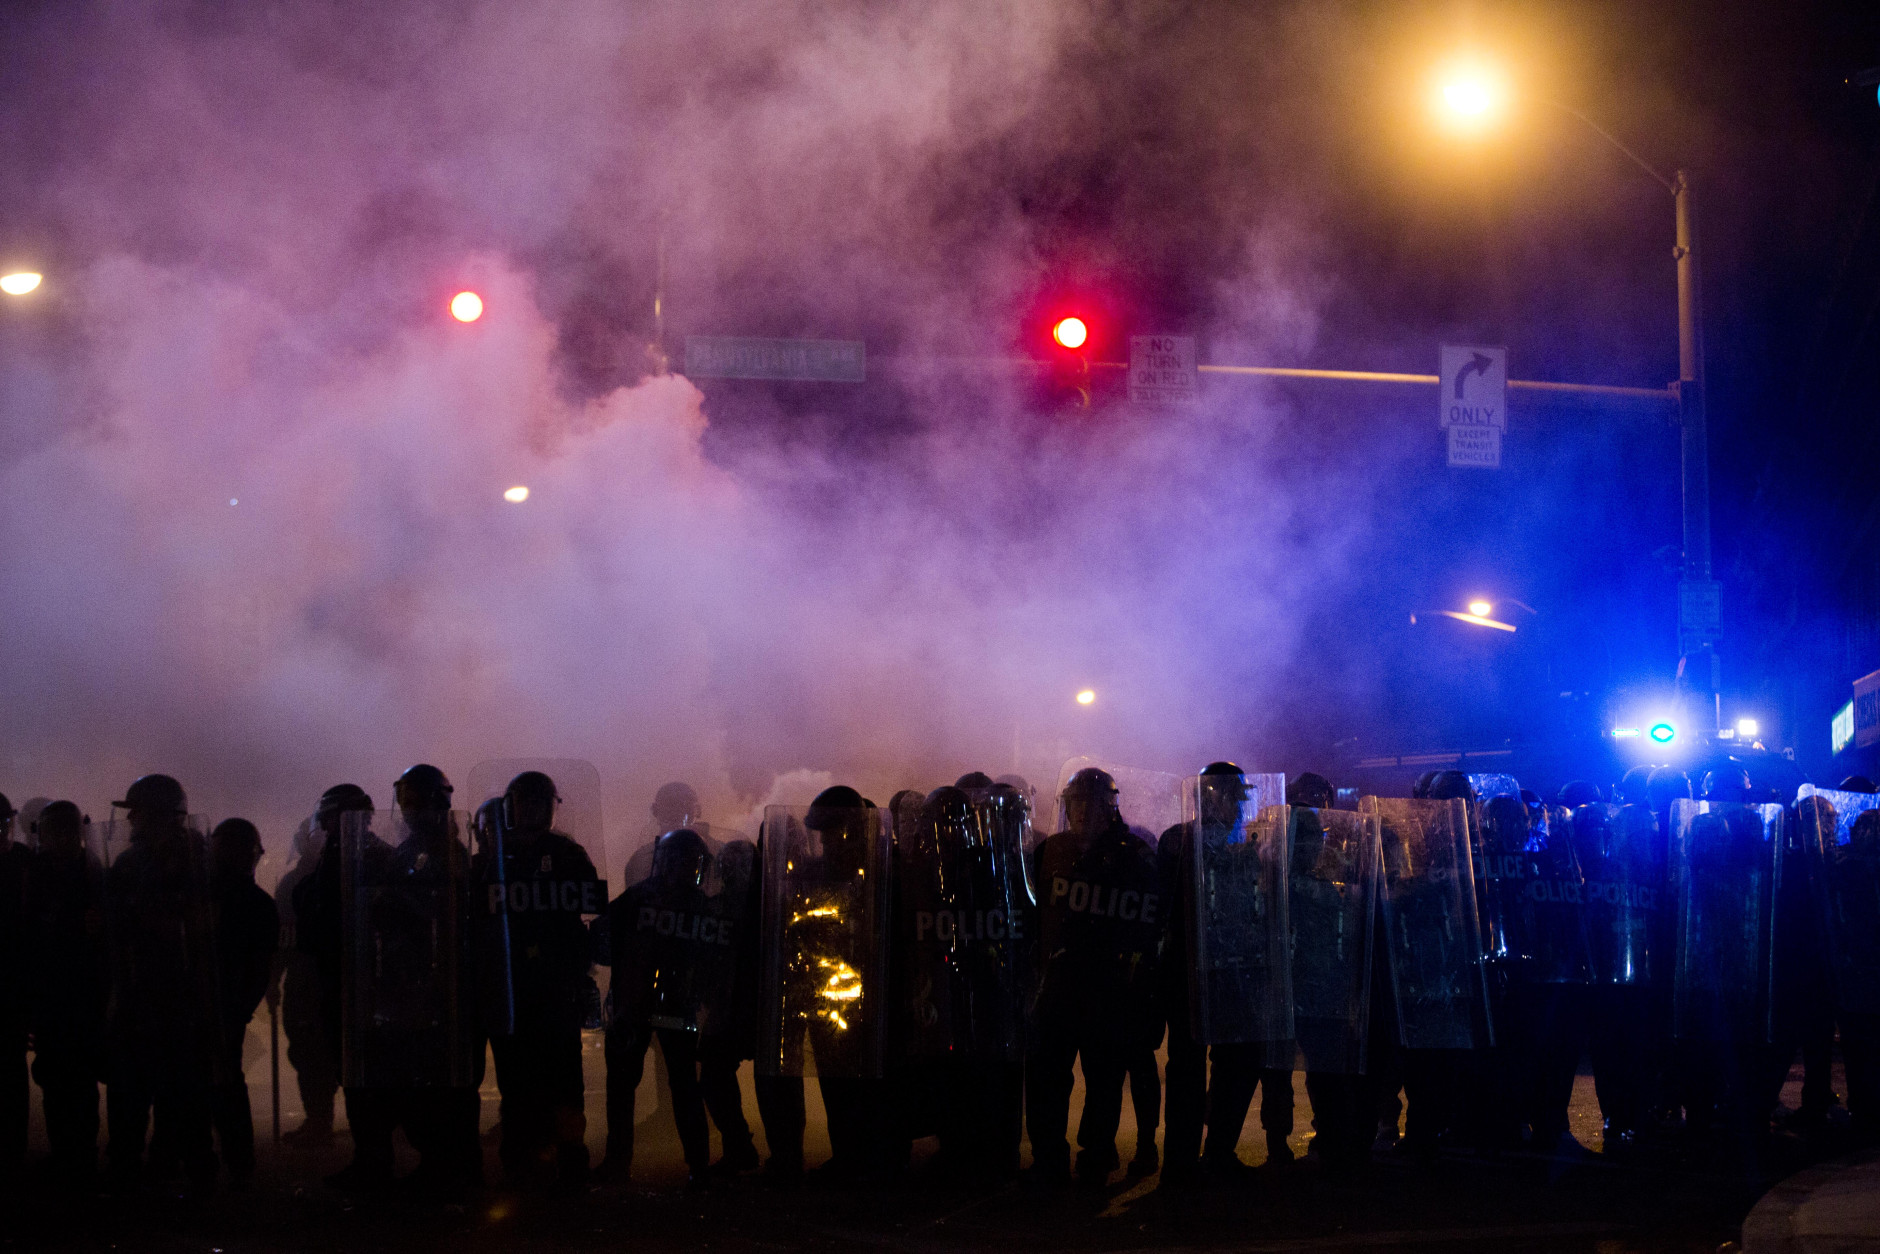 Police advance through a cloud of tear gas as they enforce curfew, Tuesday, April 28, 2015, in Baltimore, a day after unrest that occurred following Freddie Gray's funeral. (AP Photo/Matt Rourke)